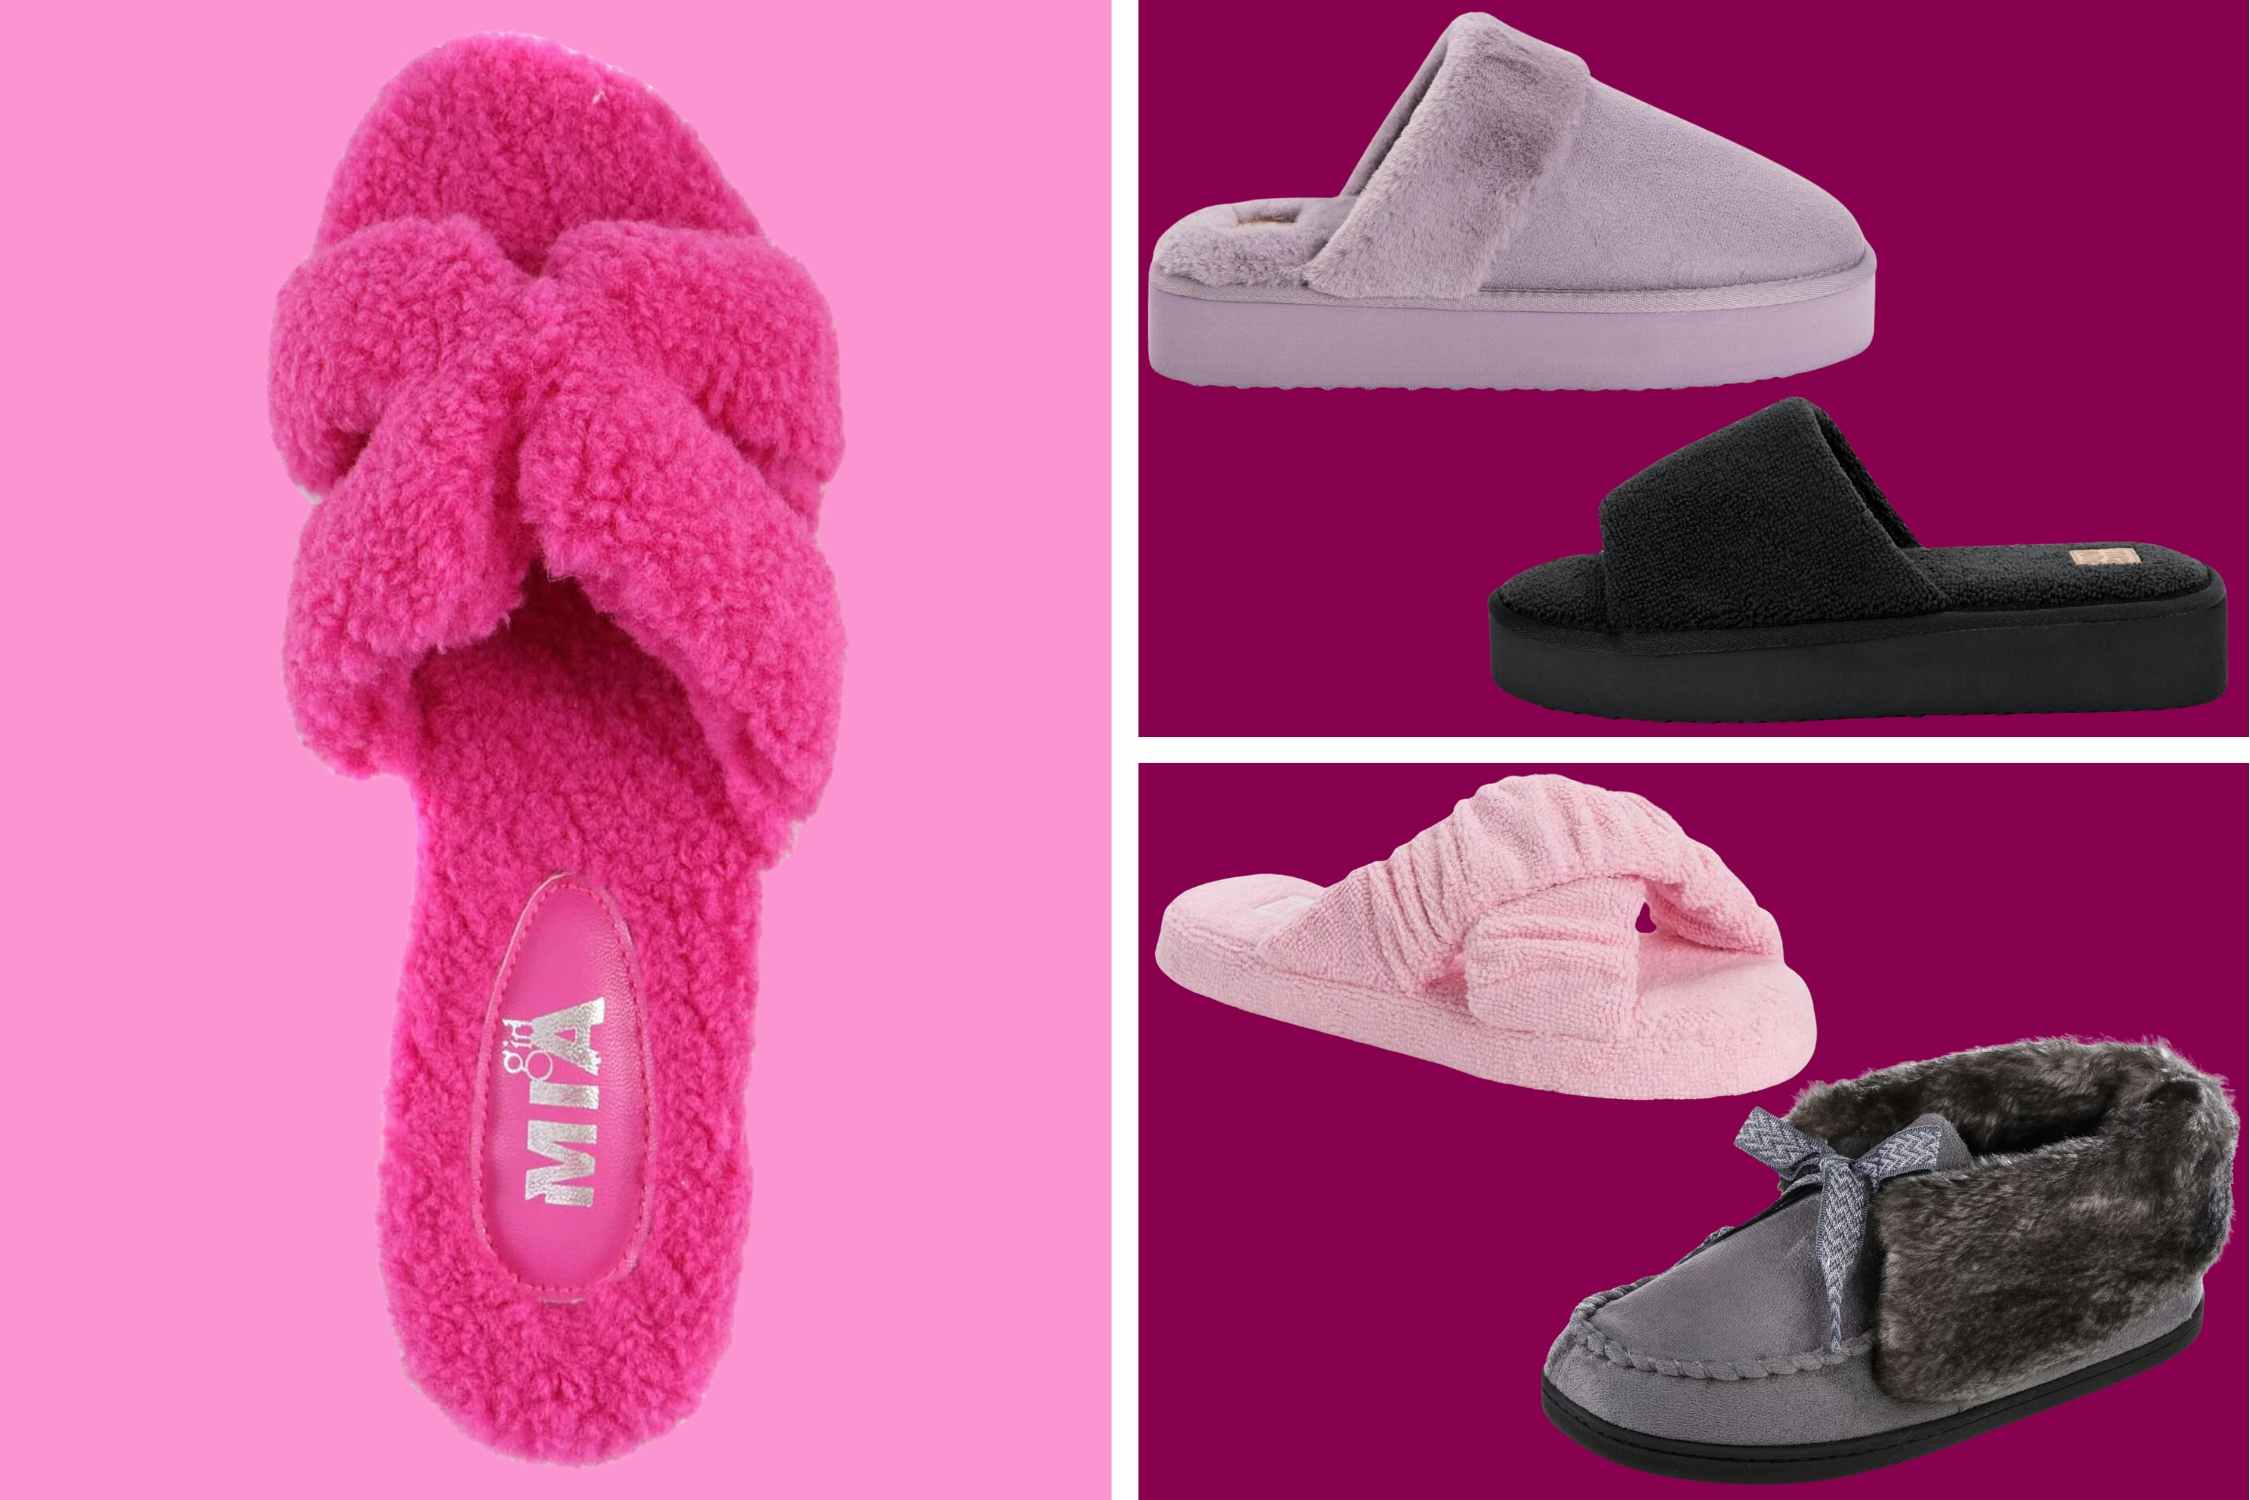 Women's Slippers, Starting at Just $7 at Walmart